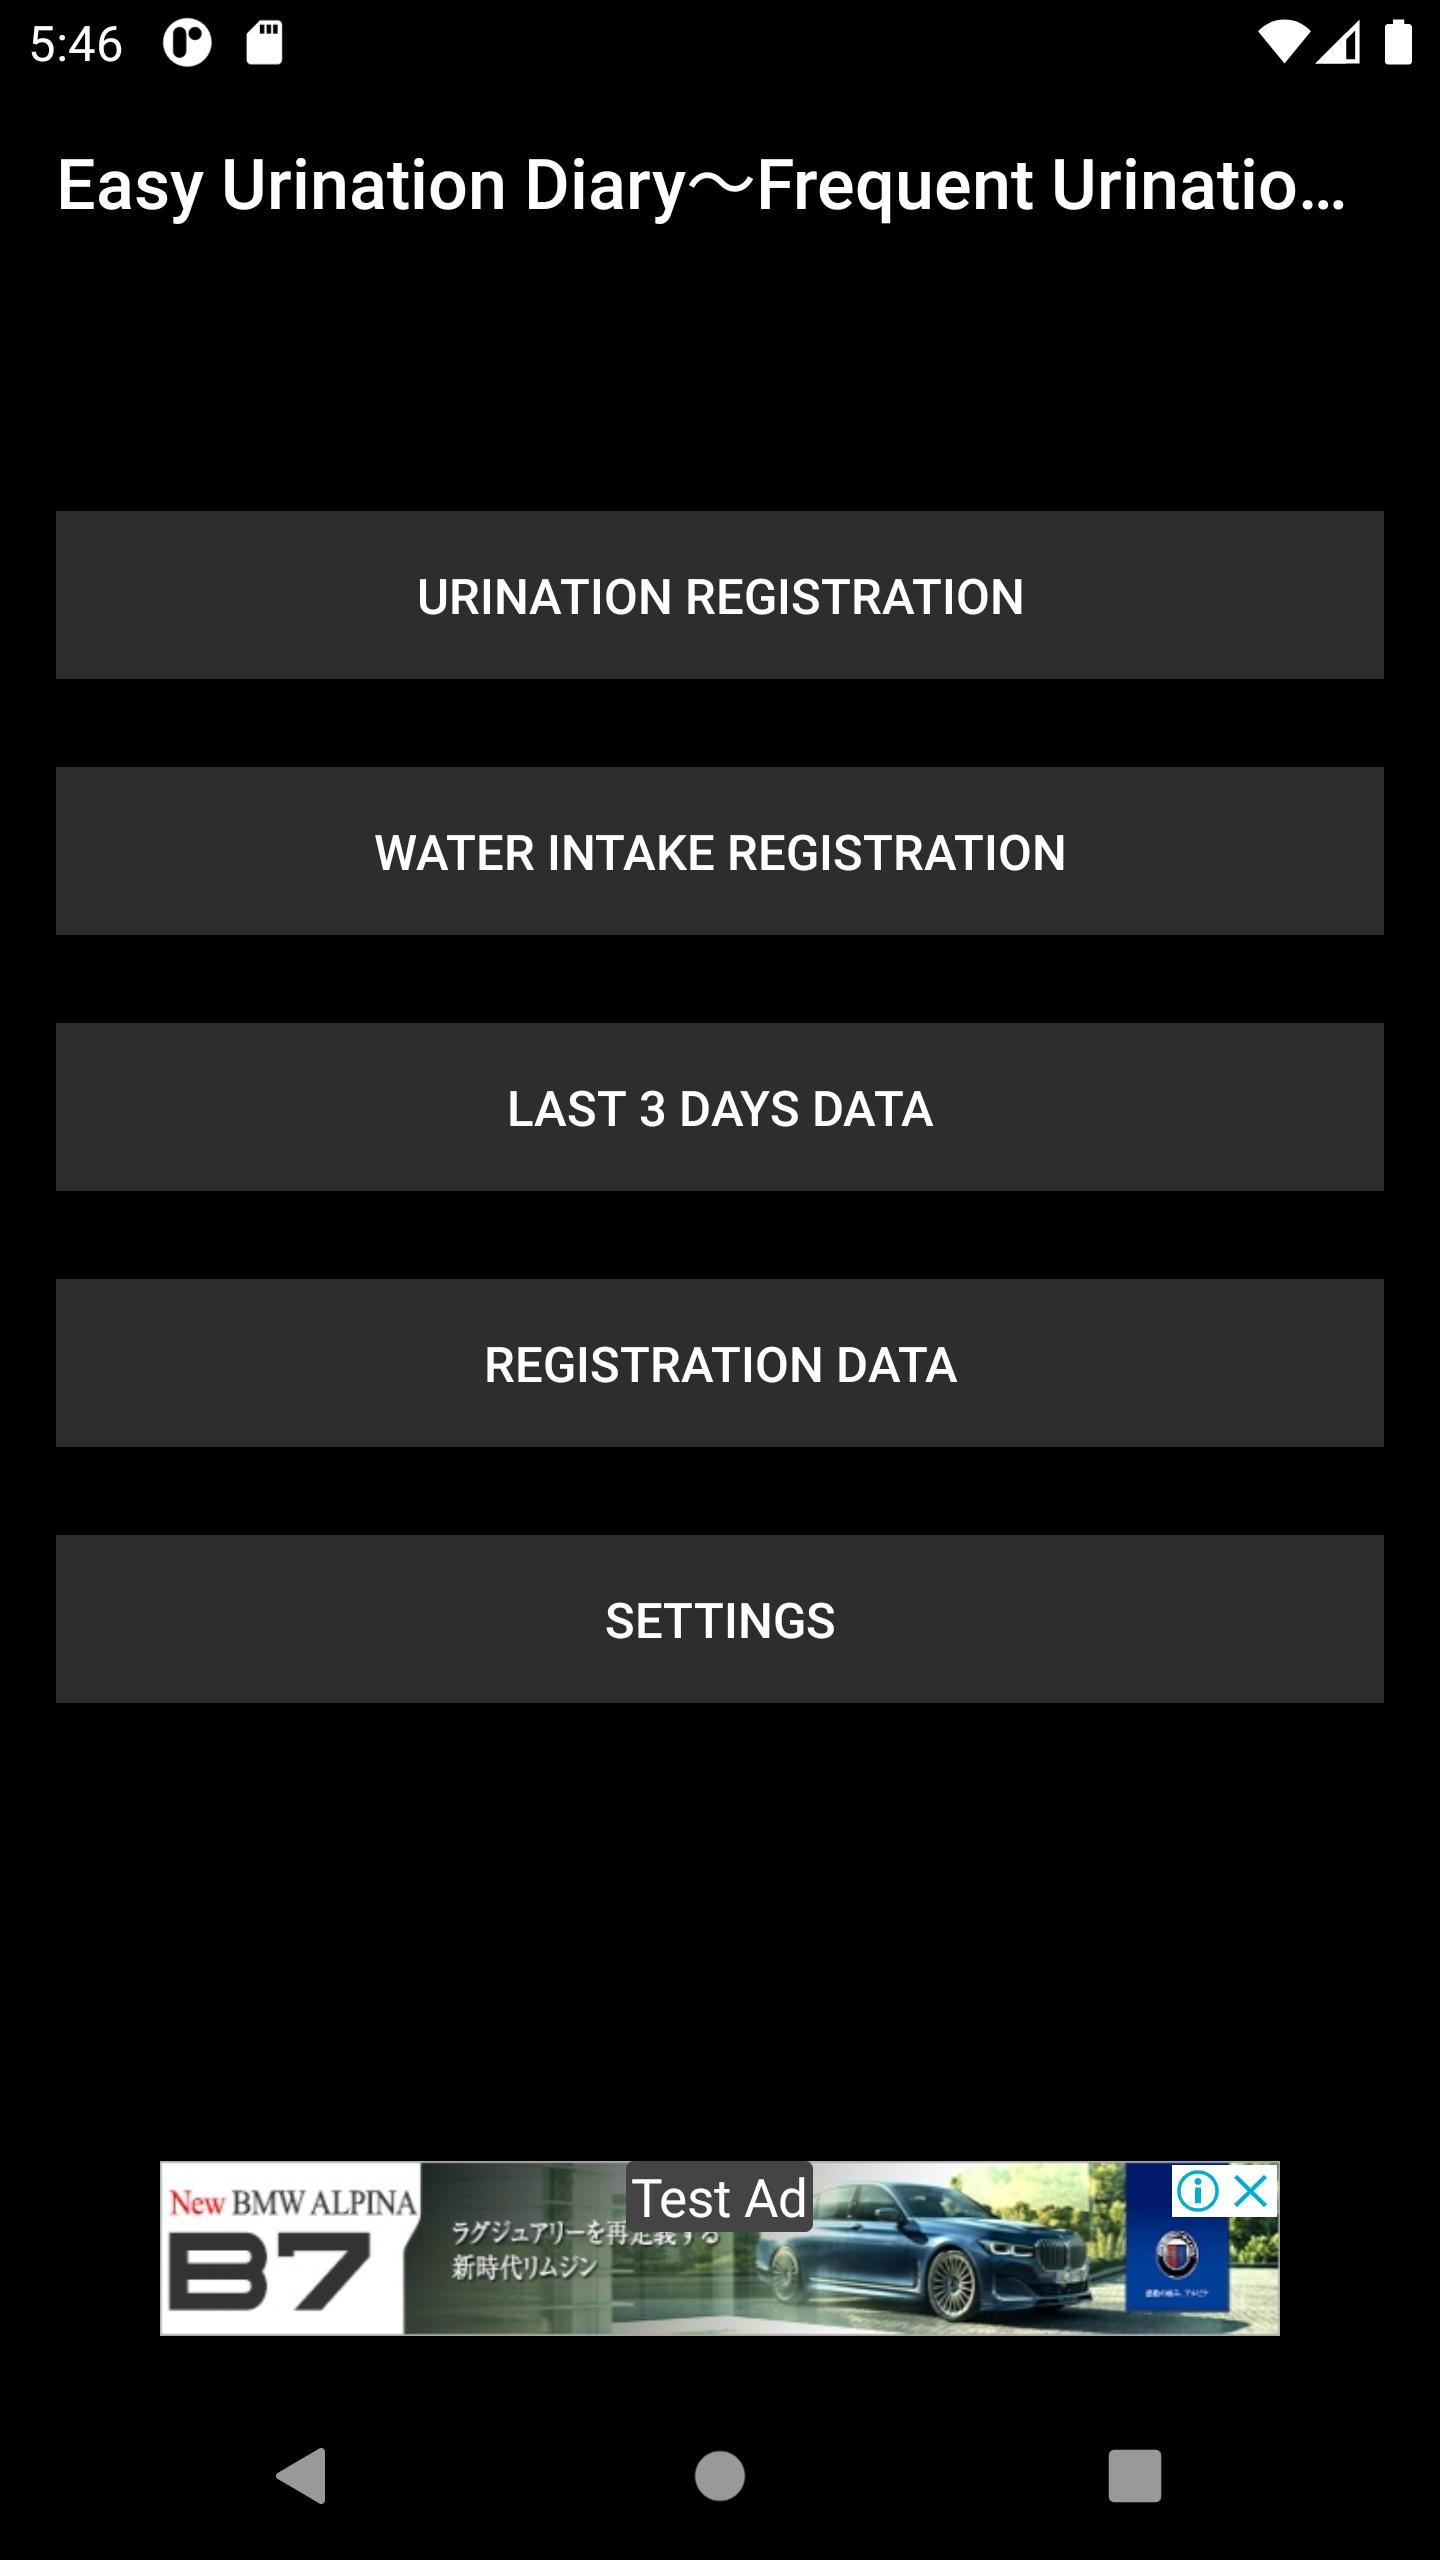 Easy Urination Diary～Frequent Urination～ 7.0 Screenshot 1